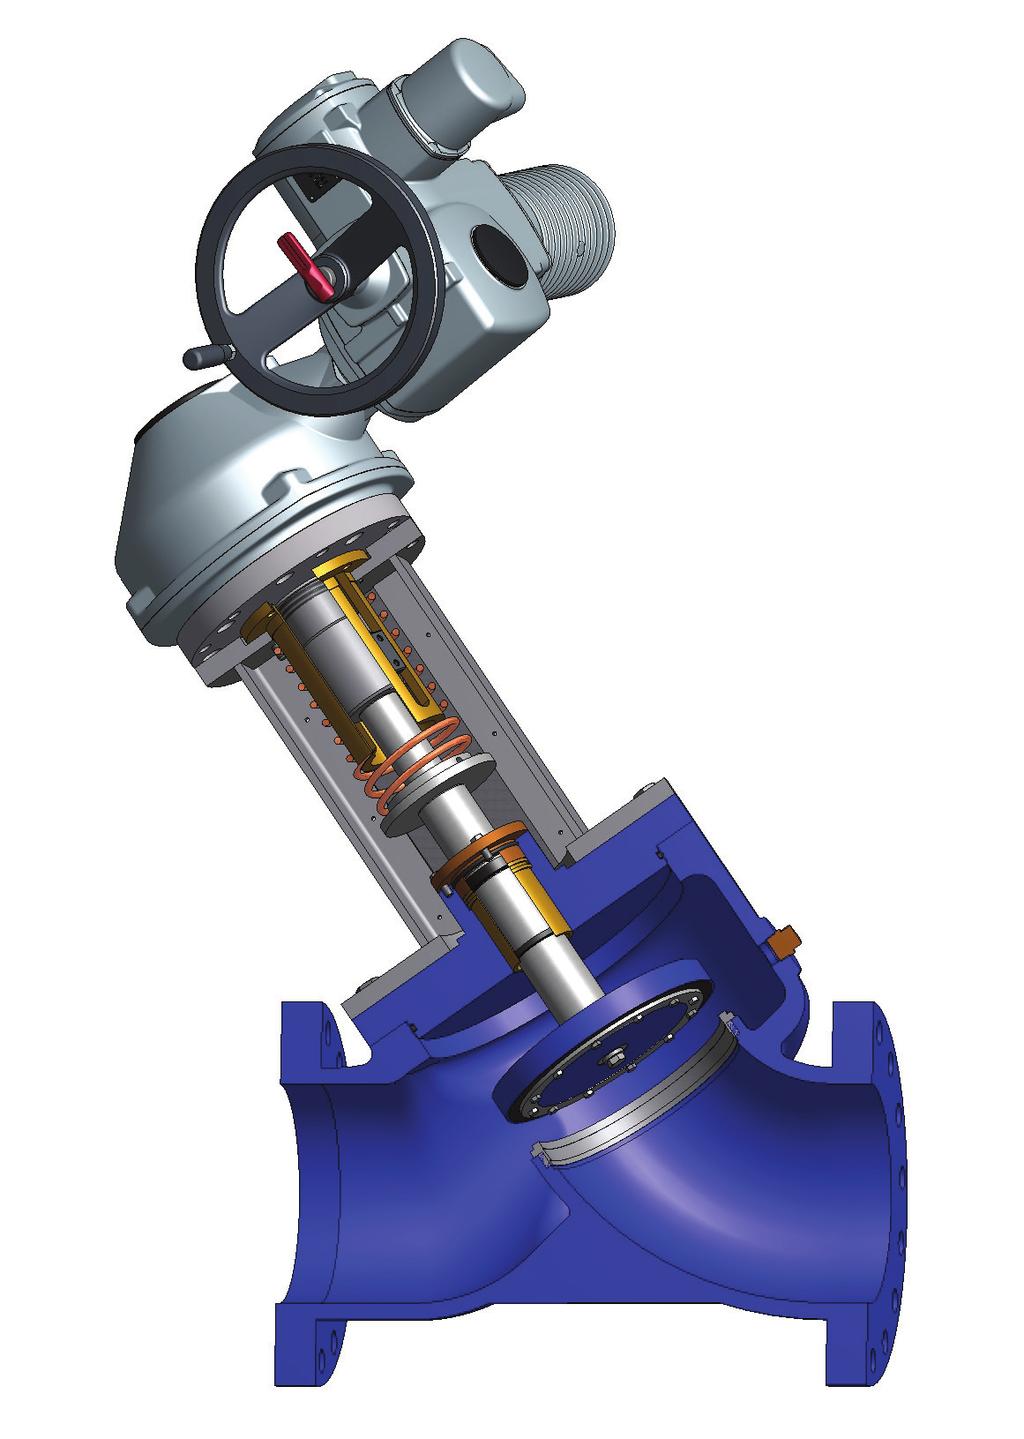 CHECKtronic Pump Control Valve The CHECKtronic Pump Control Valve has evolved from VAG s extensive experience in the design of automatic control valves to control surges associated with the starting